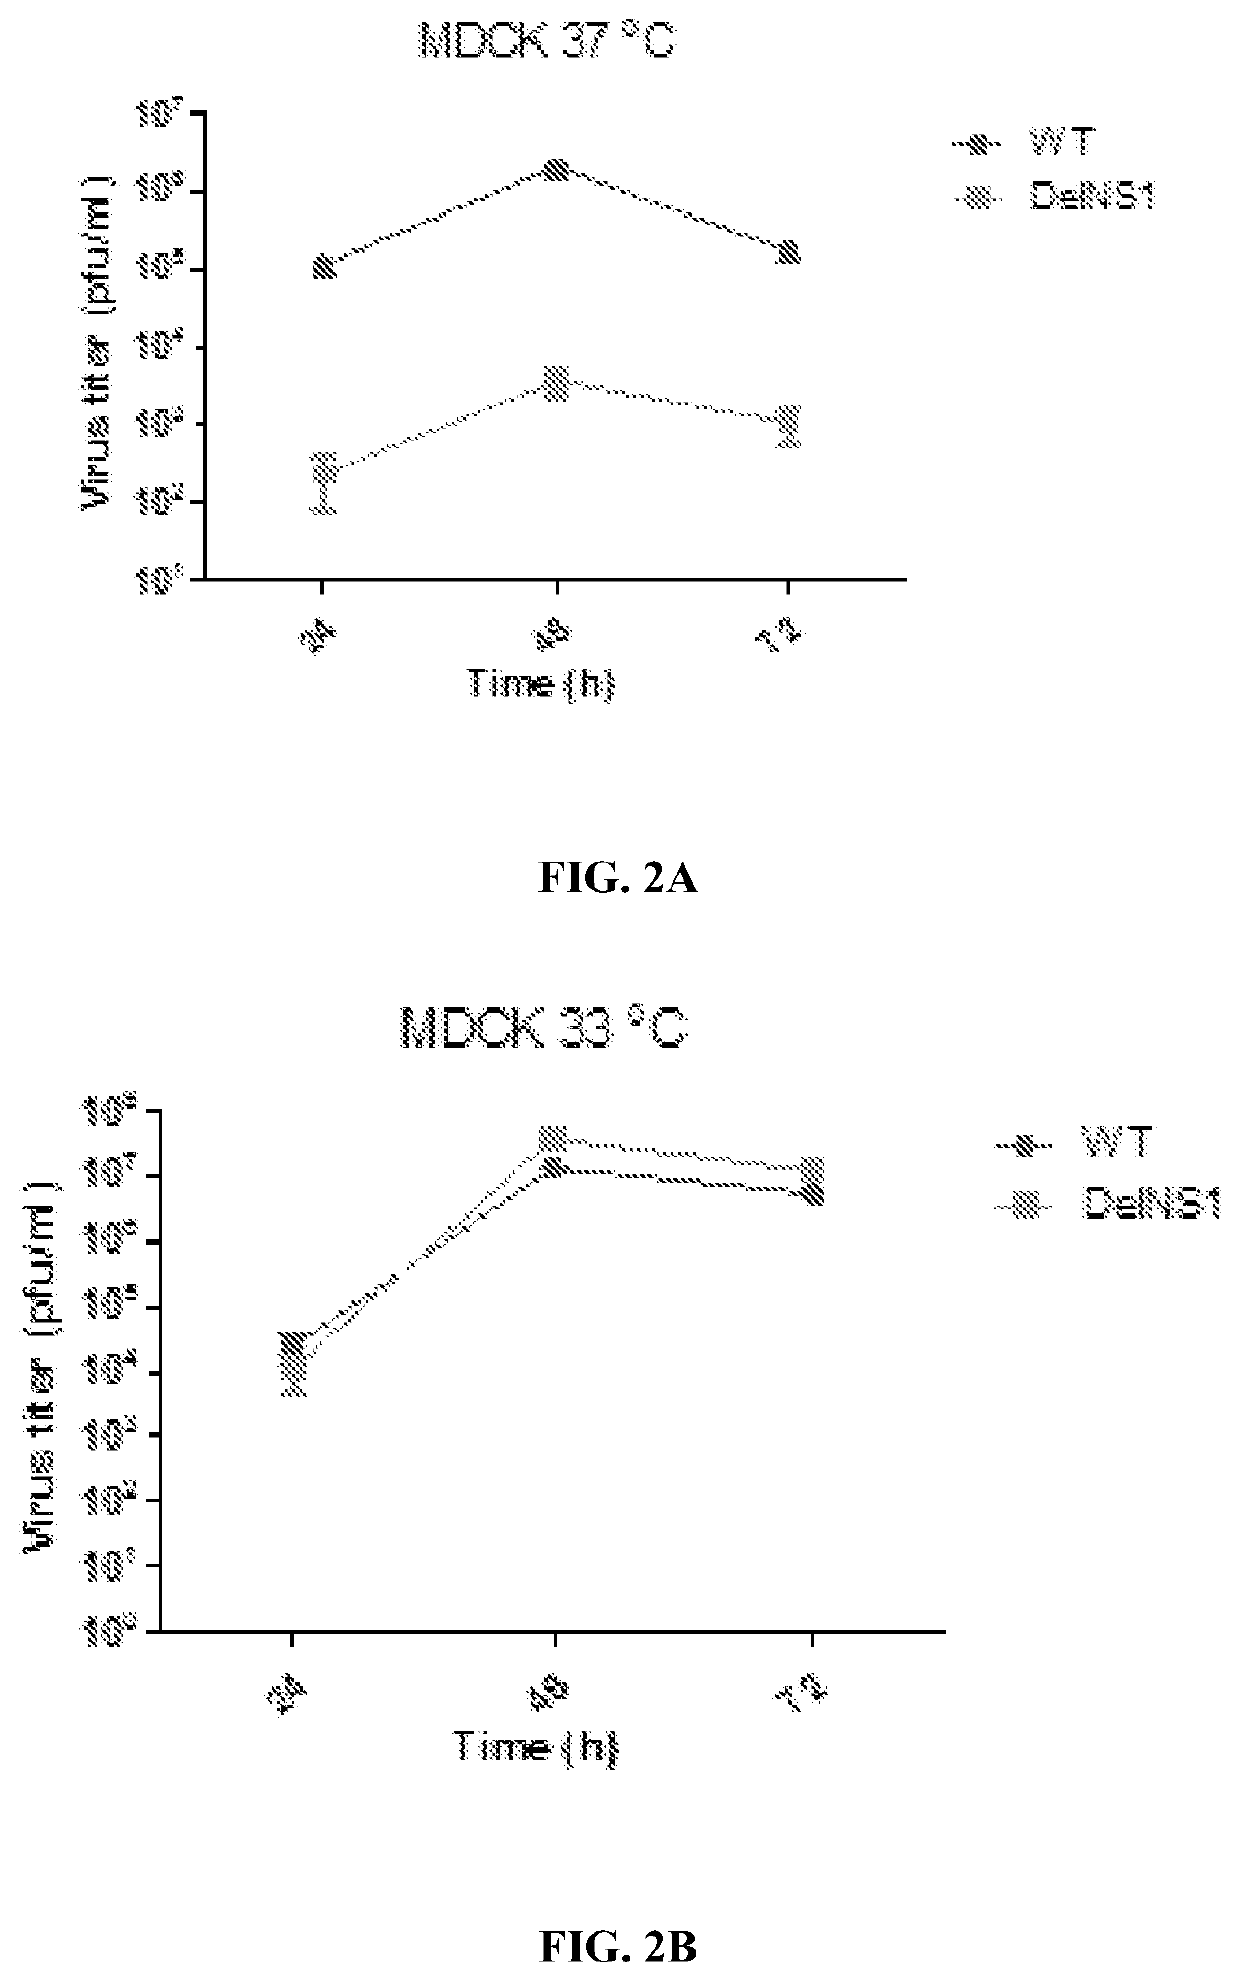 Live attenuated influenza b virus compositions methods of making and using thereof